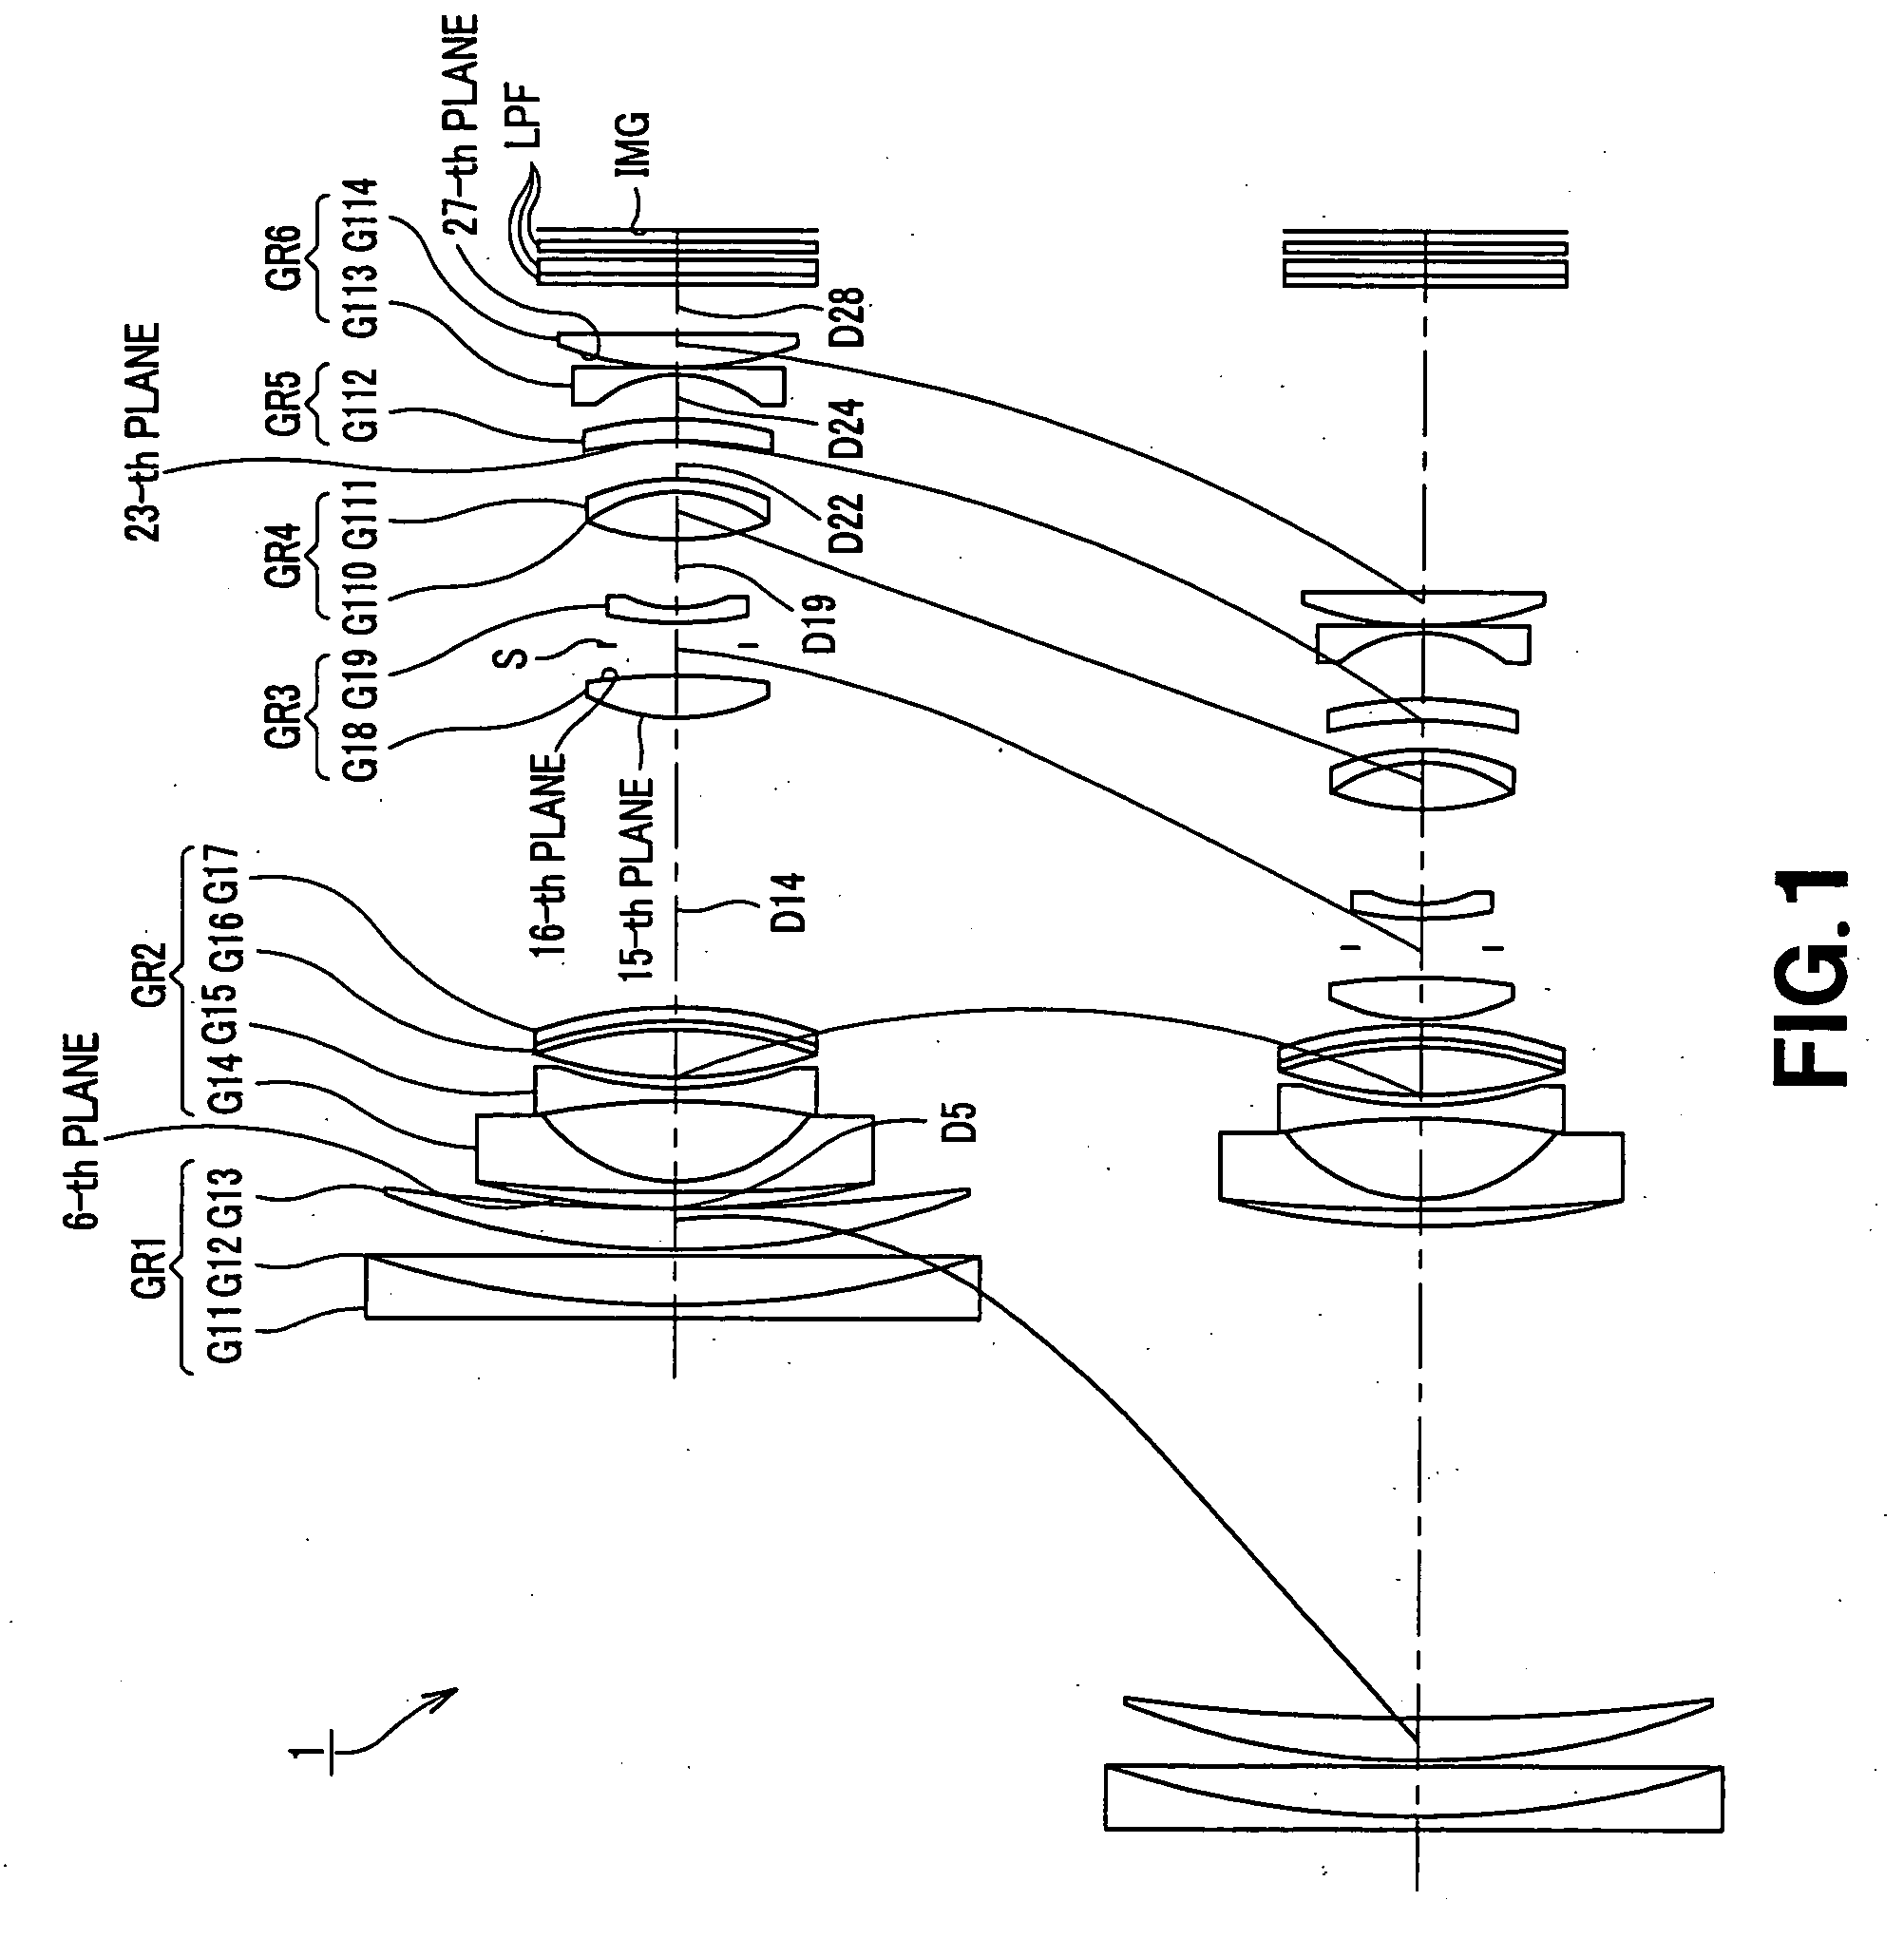 Zoom Lens System and Image Pick-Up Apparatus